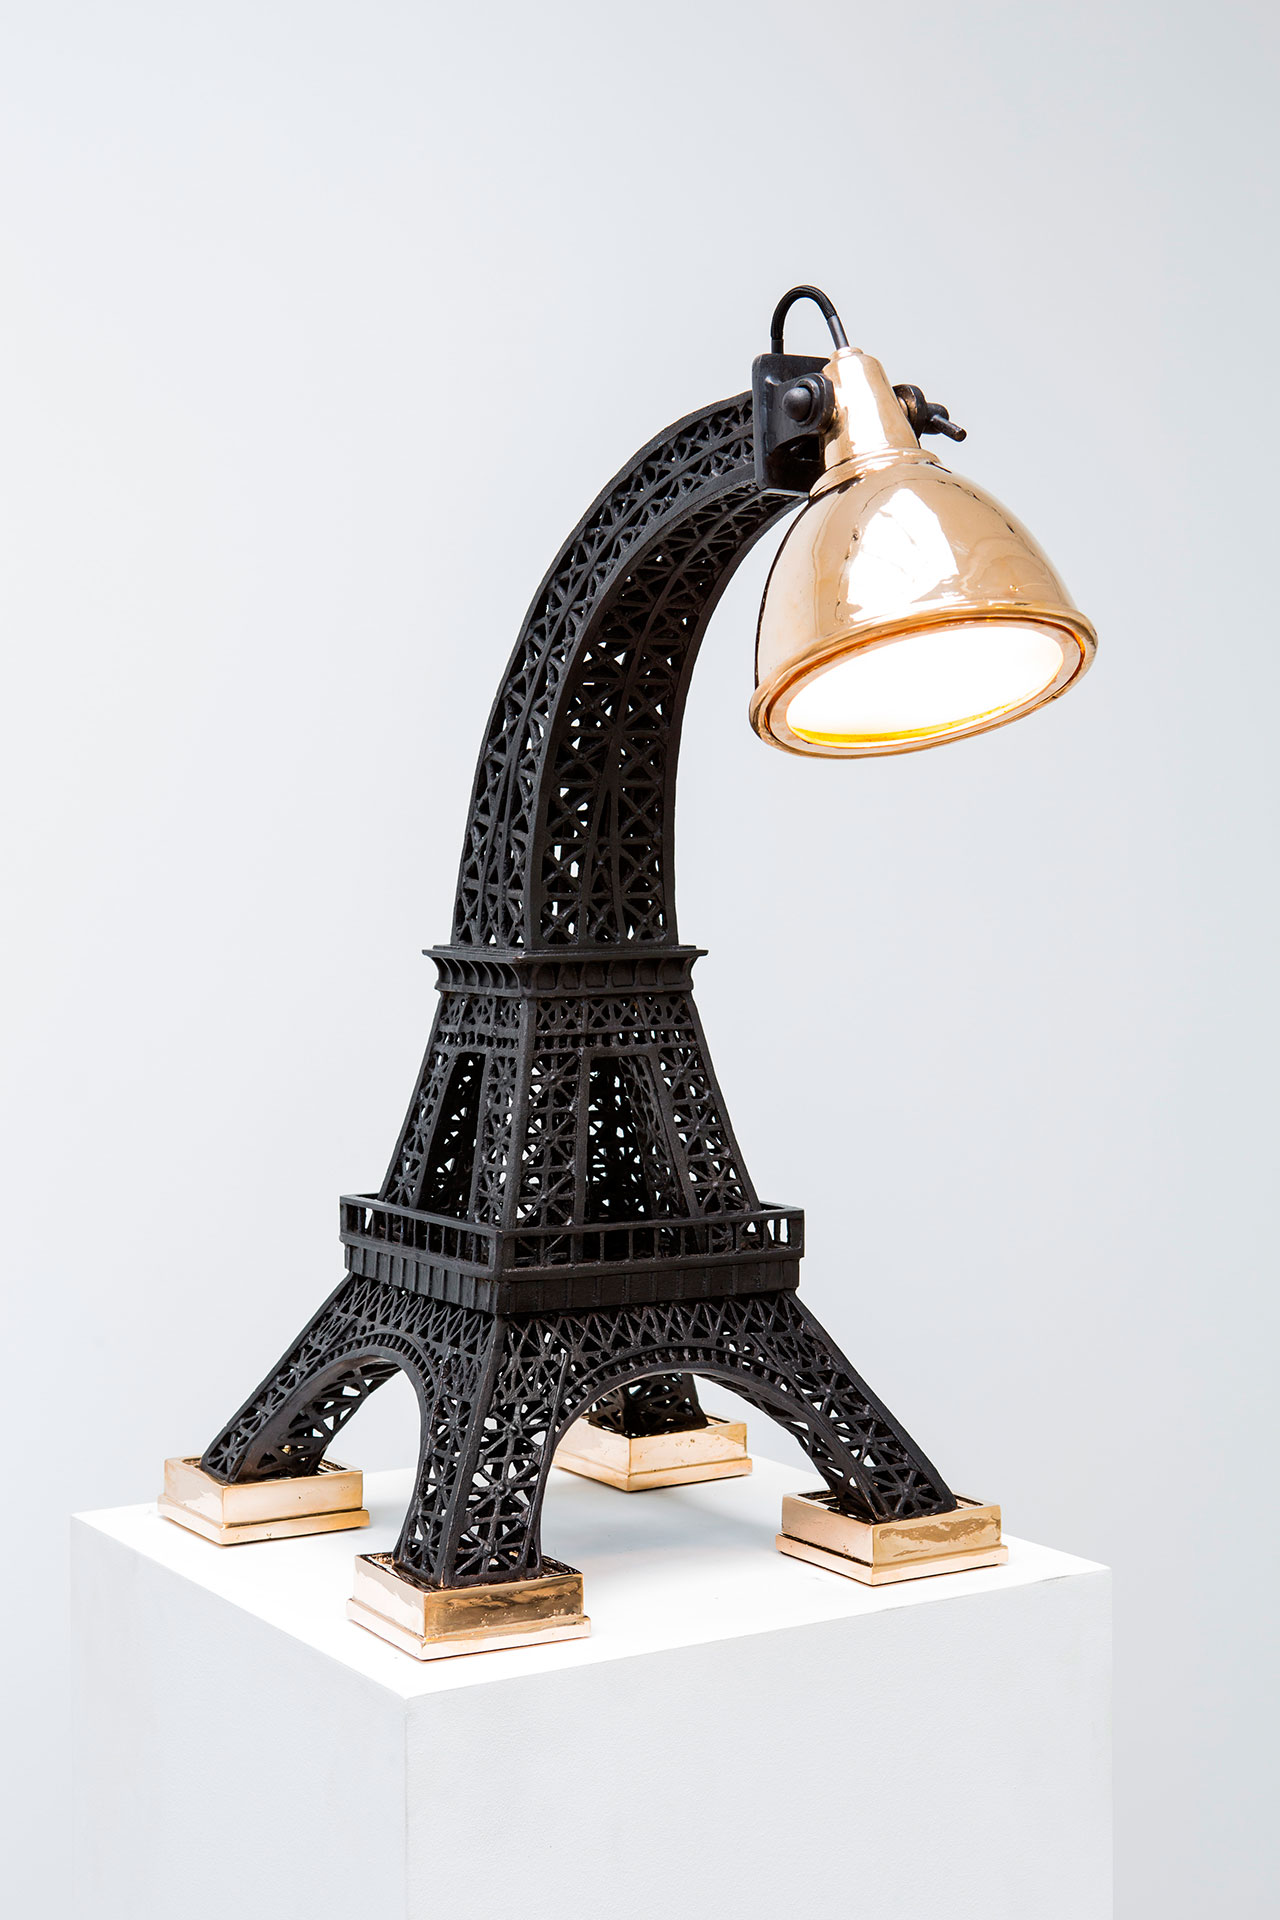 TOUR EIFFEL from Landmark series, 2012. Polished and patinated bronze, handblown glass, LED light fittings. Courtesy of Carpenters Workshop Gallery.